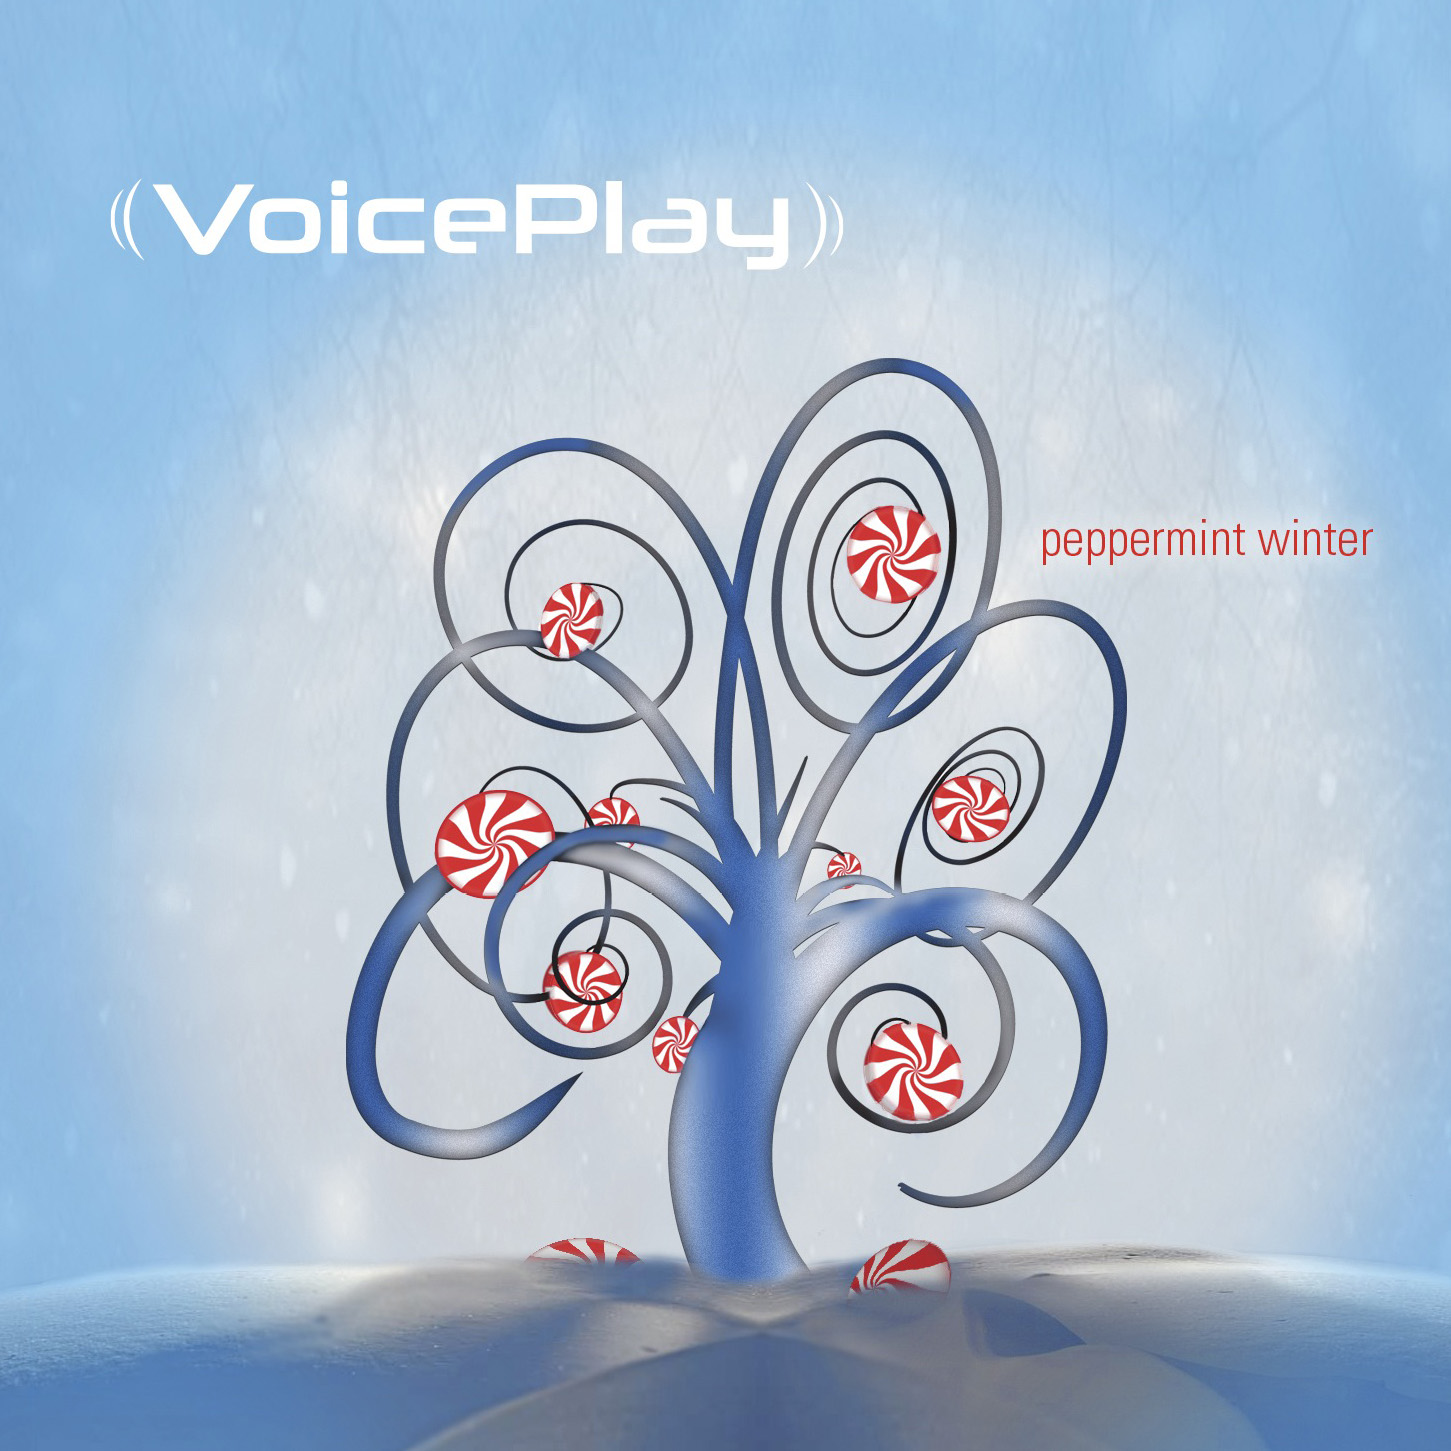 Voiceplay: Peppermint Winter